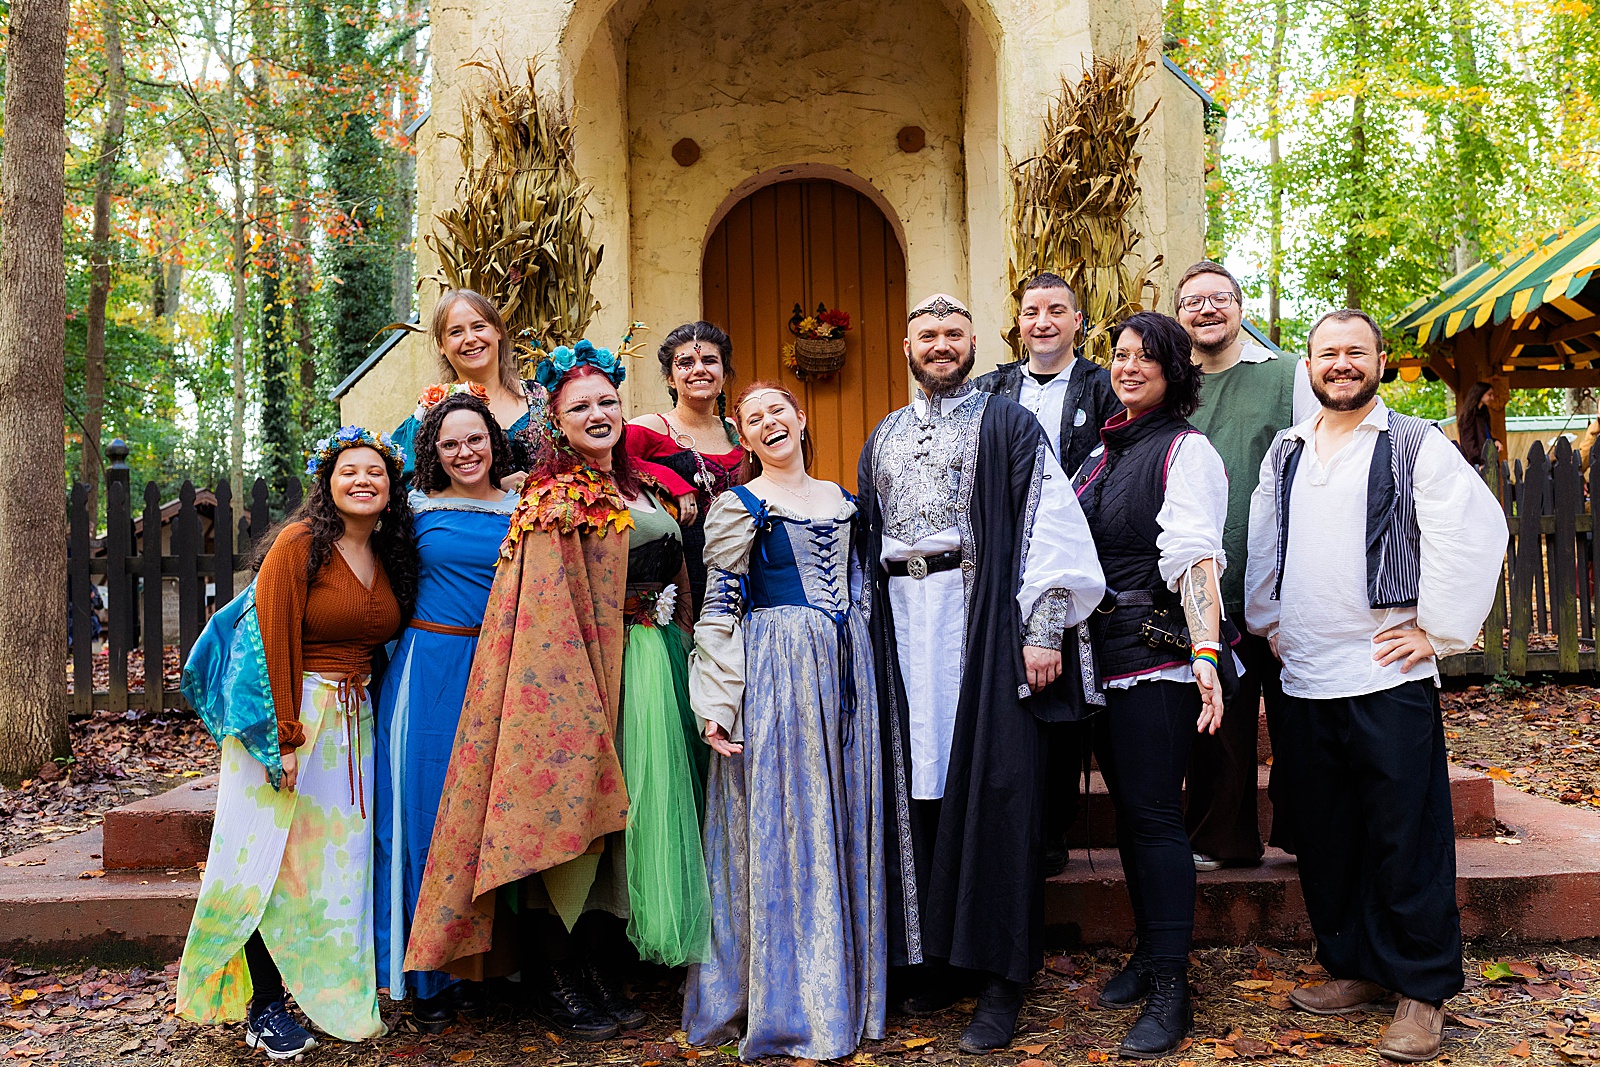 Bride and groom and friends gather in costume for a photo at a MD Renaissance wedding.